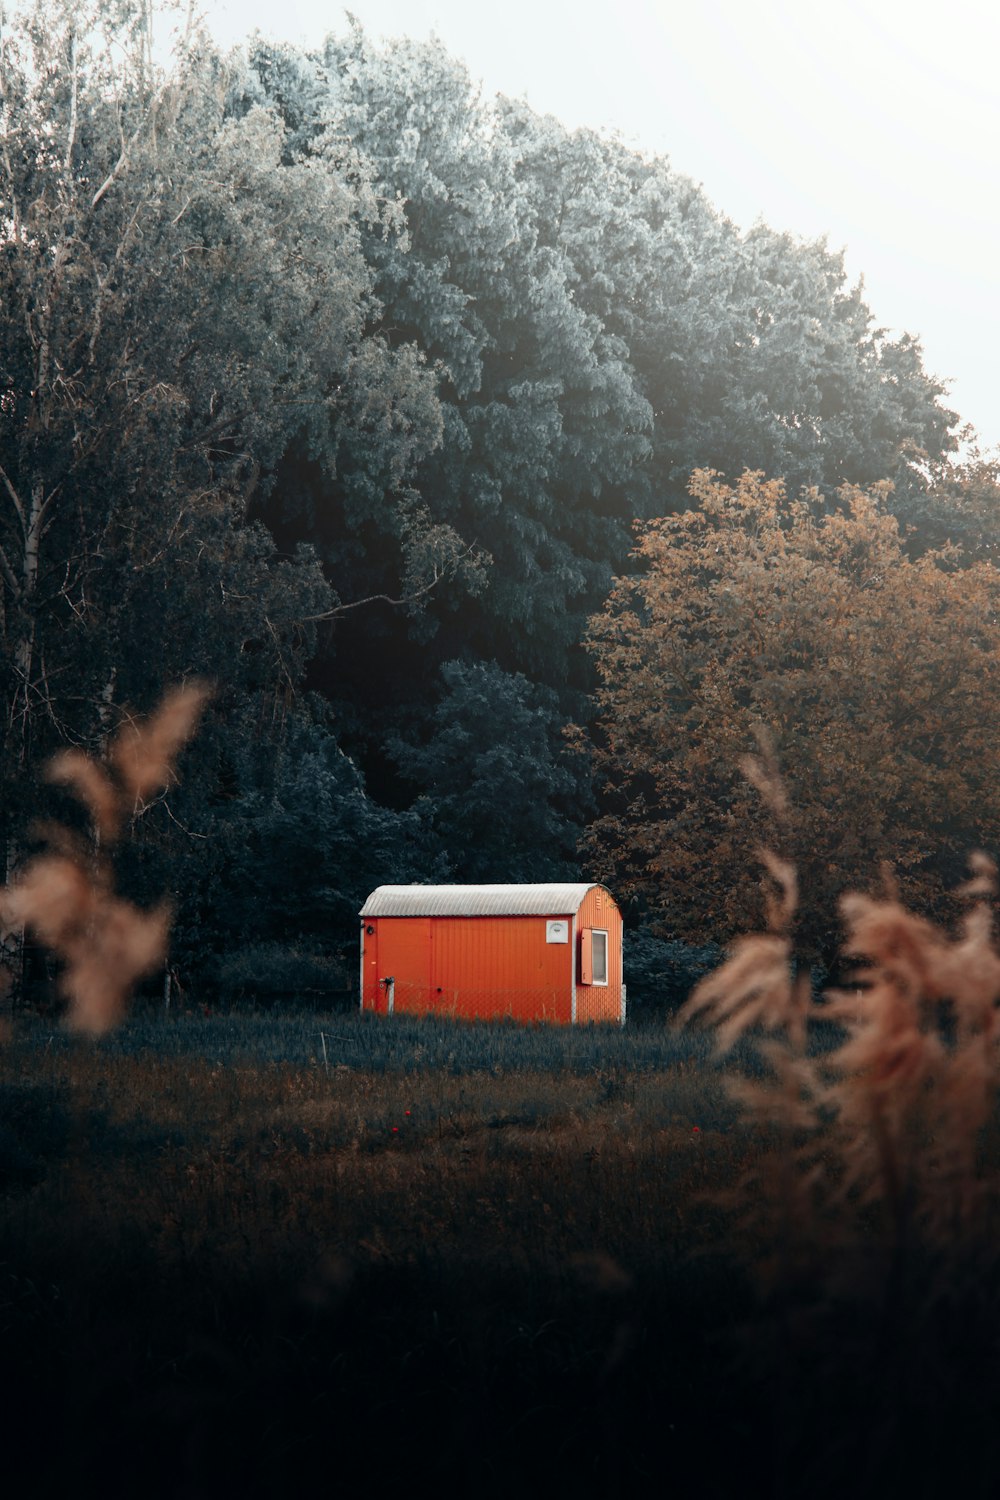 a small orange building in a field with trees in the background